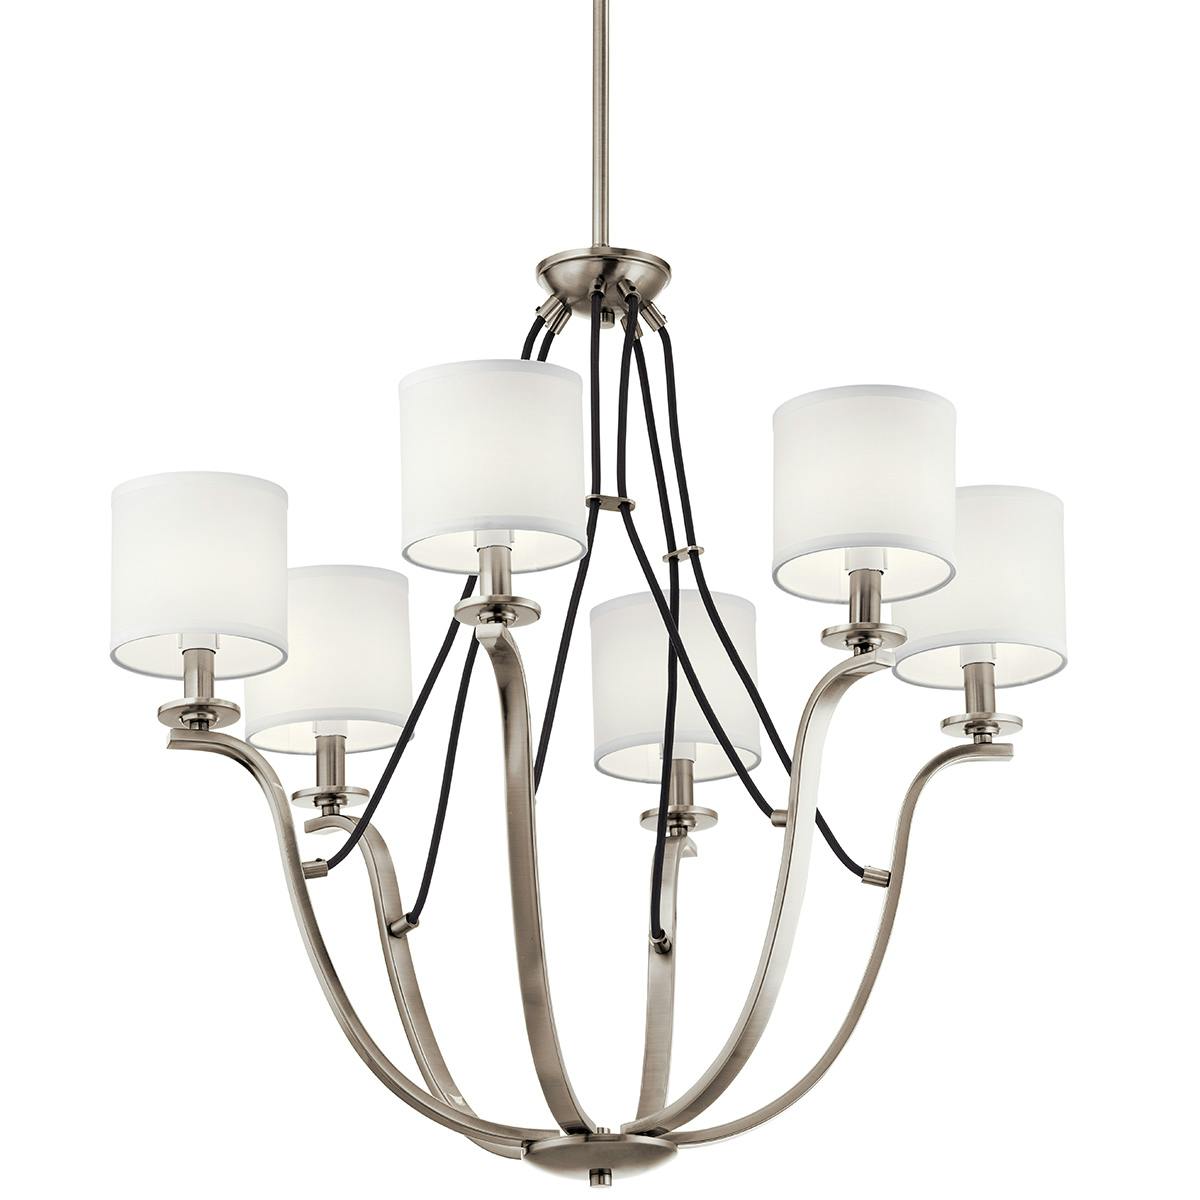 Close up view of the Thisbe 27.5" 6 Light Chandelier Pewter on a white background